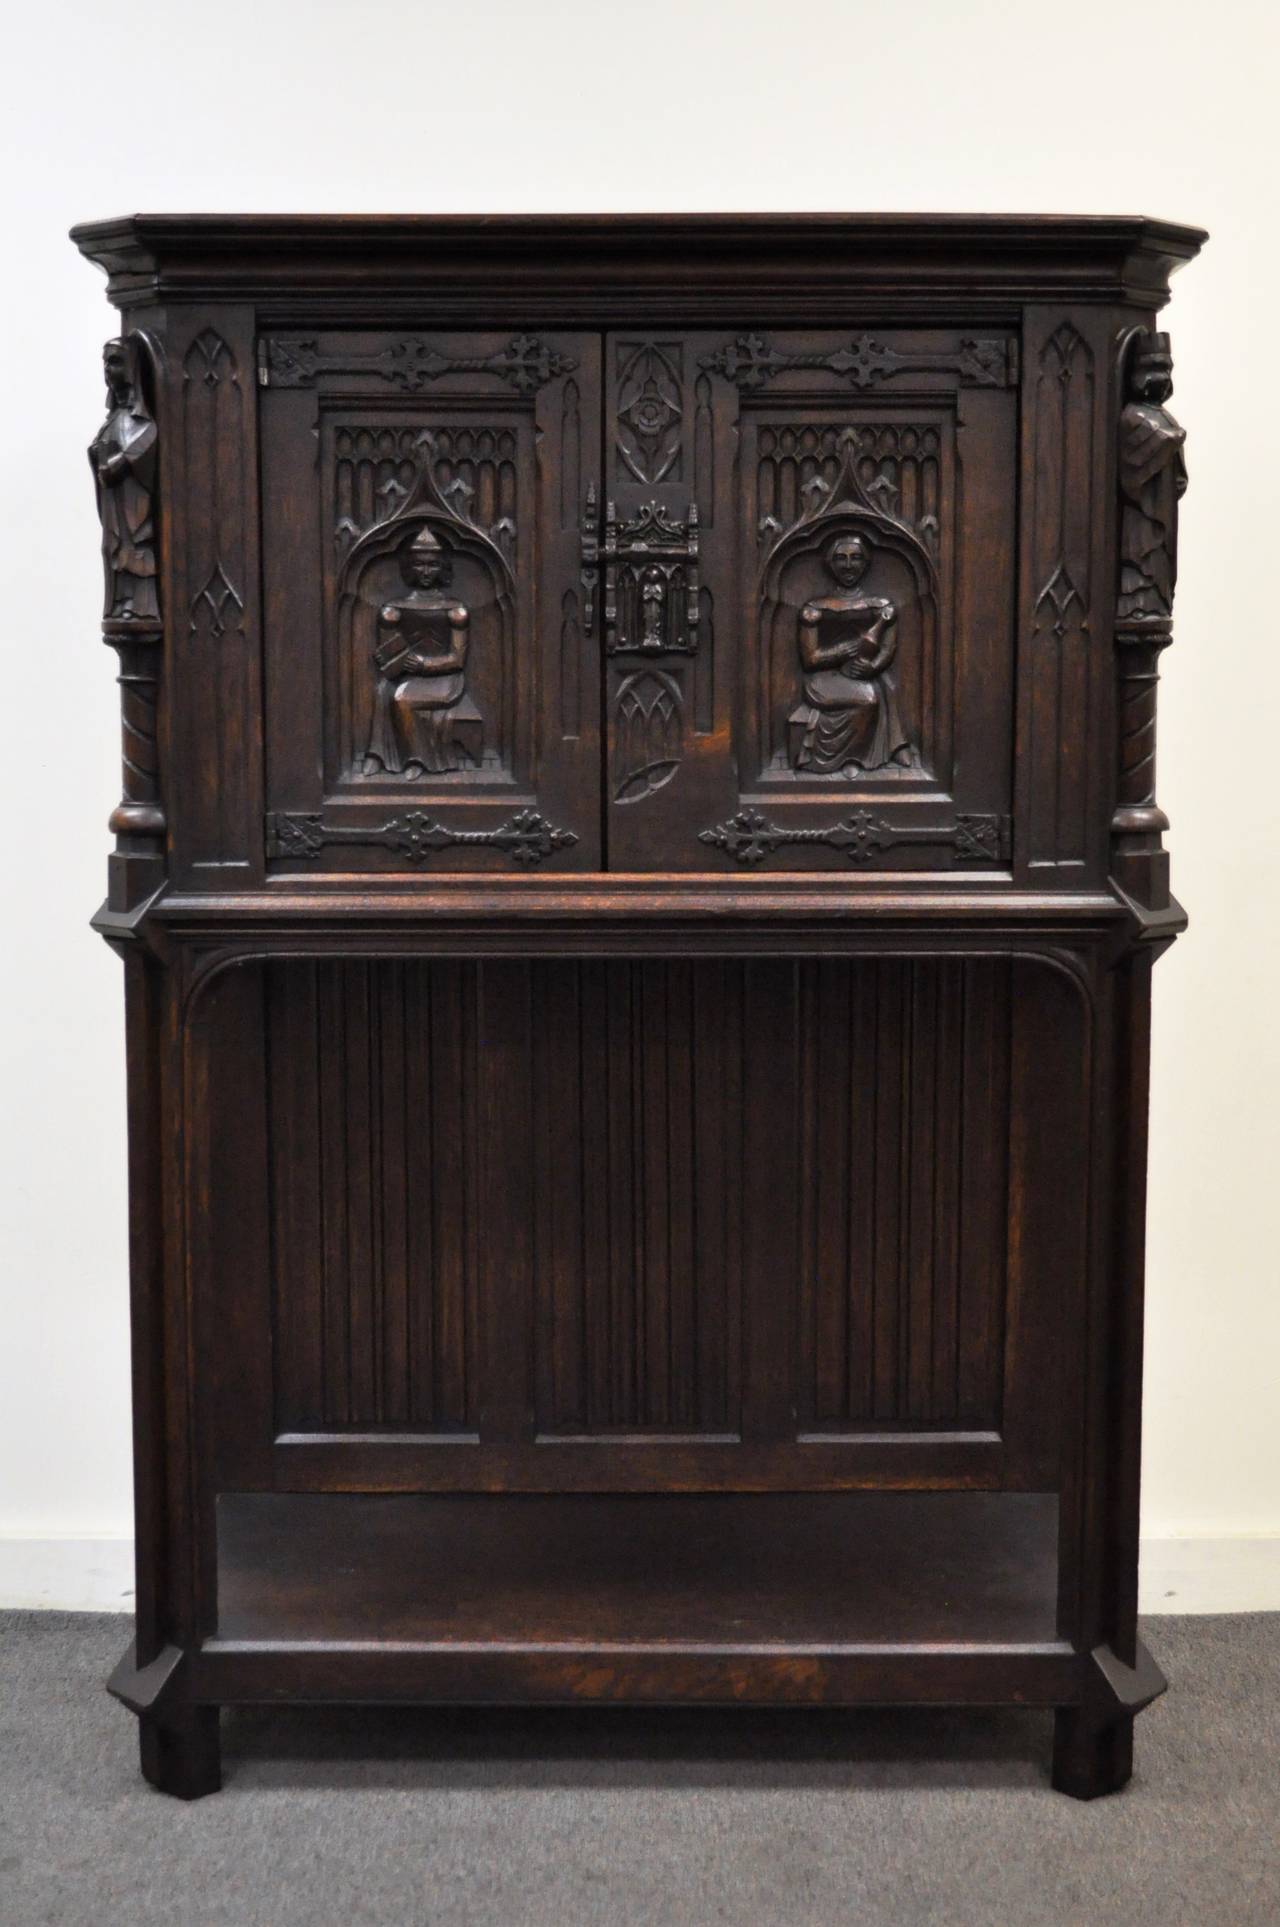 Hand-carved solid oak Renaissance / Gothic Revival cabinet Made in Belgium. The cabinet features carvings of several figures in relief surrounded by carved Gothic style architectural elements. The doors have large sculptural leaf form cast iron